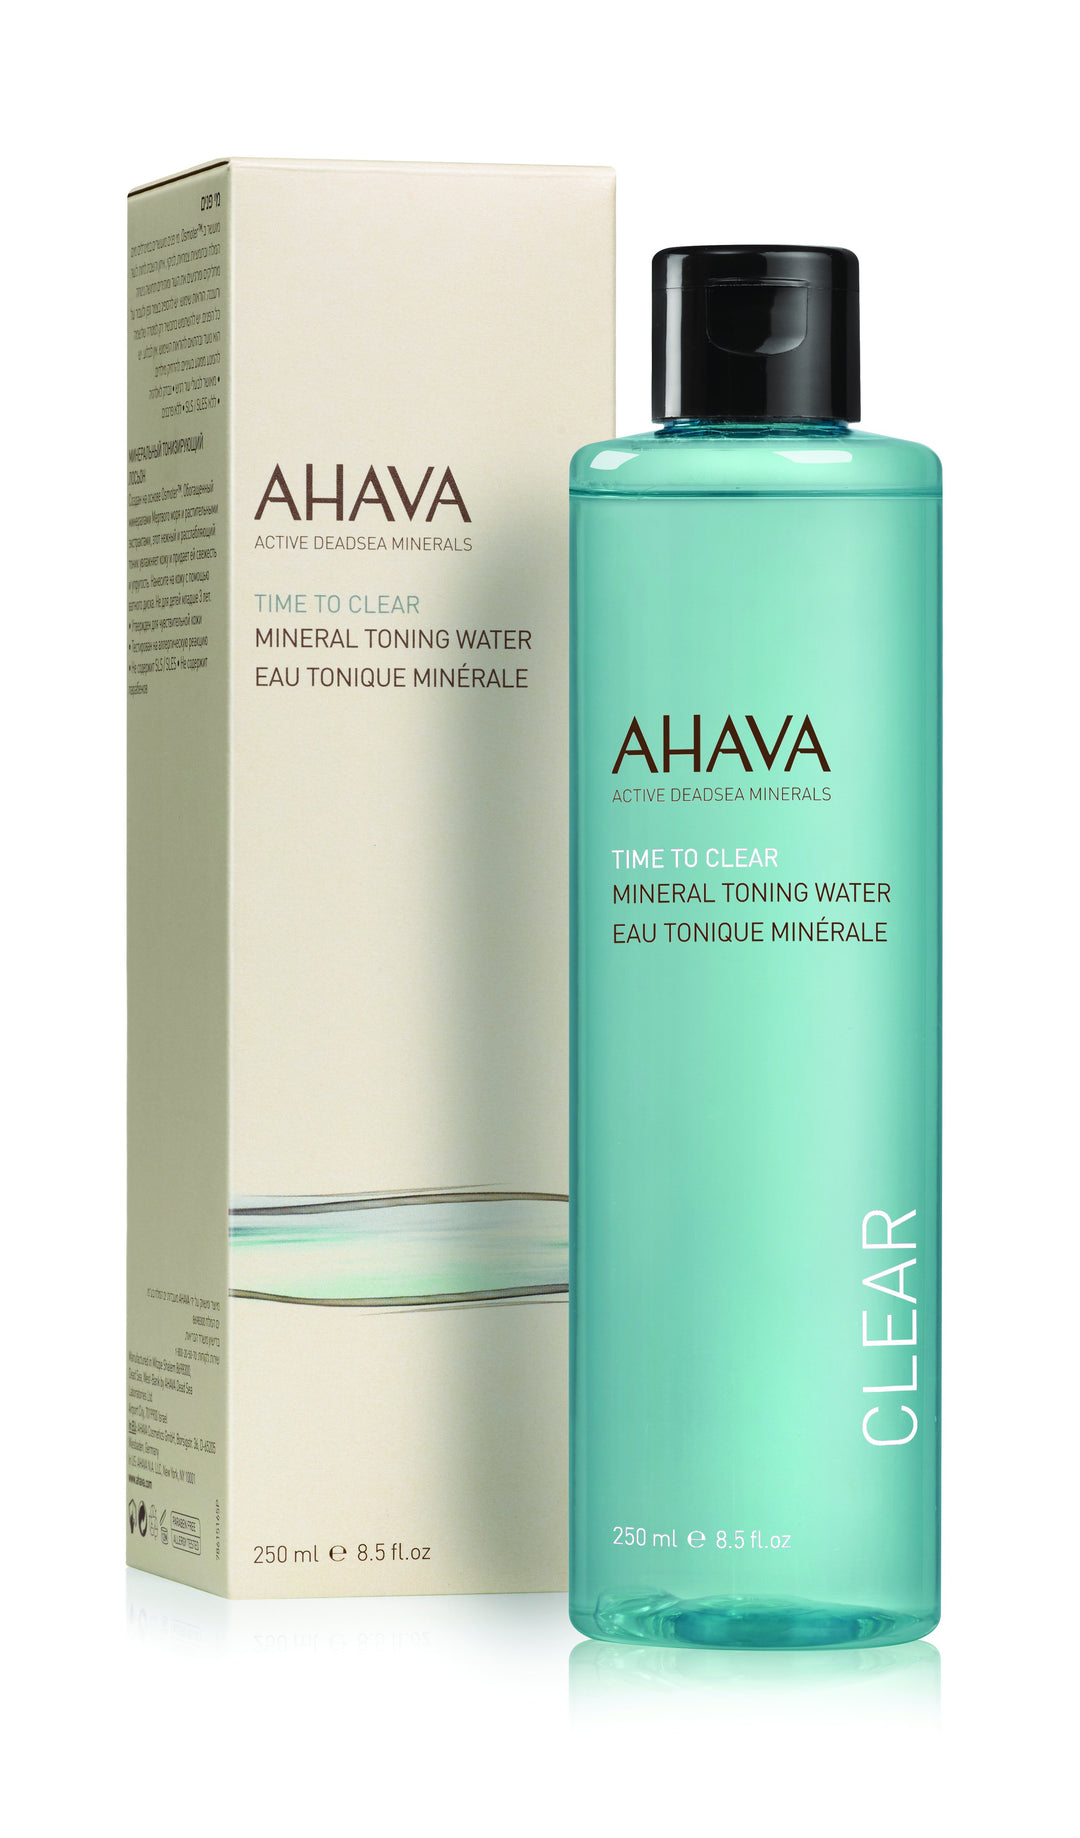 Ahava Mineral toning water - SkinEffects Zwolle